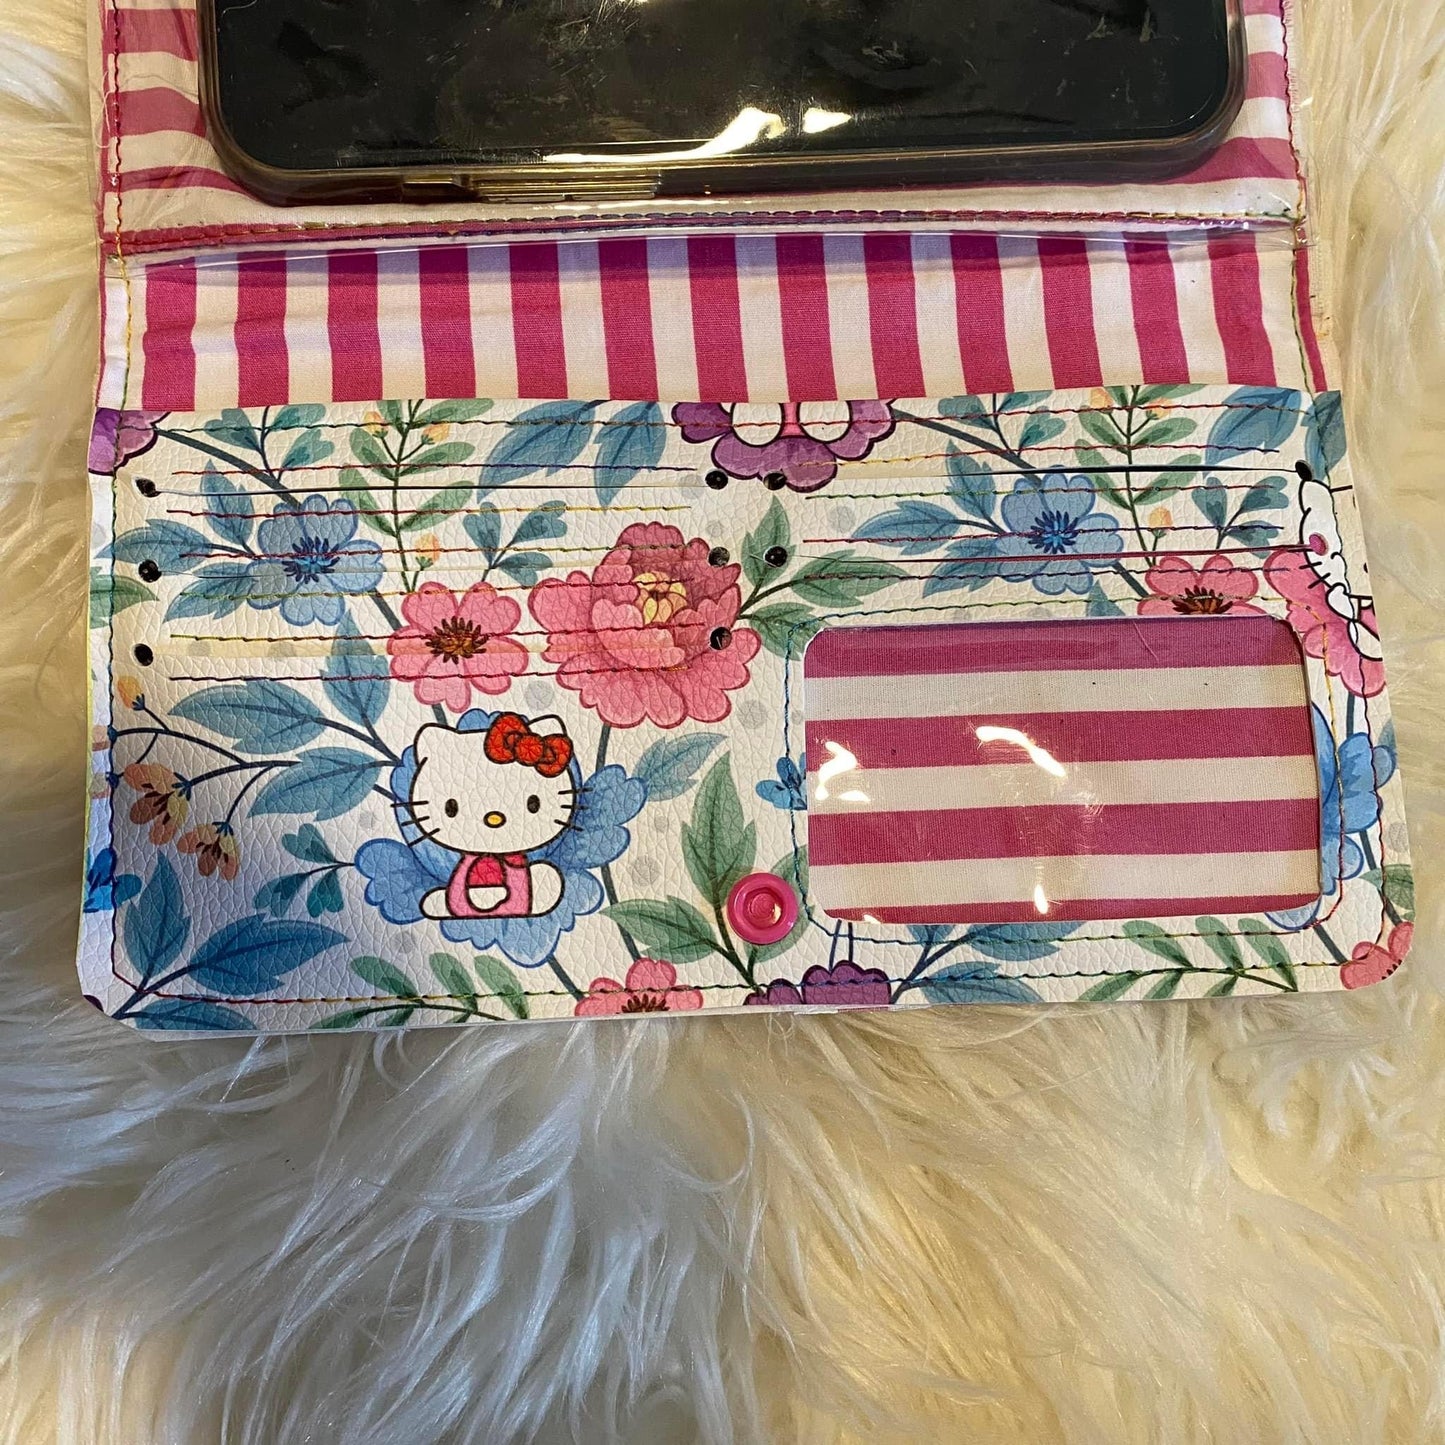 Faith Clutch PDF sewing pattern (includes SVGs)